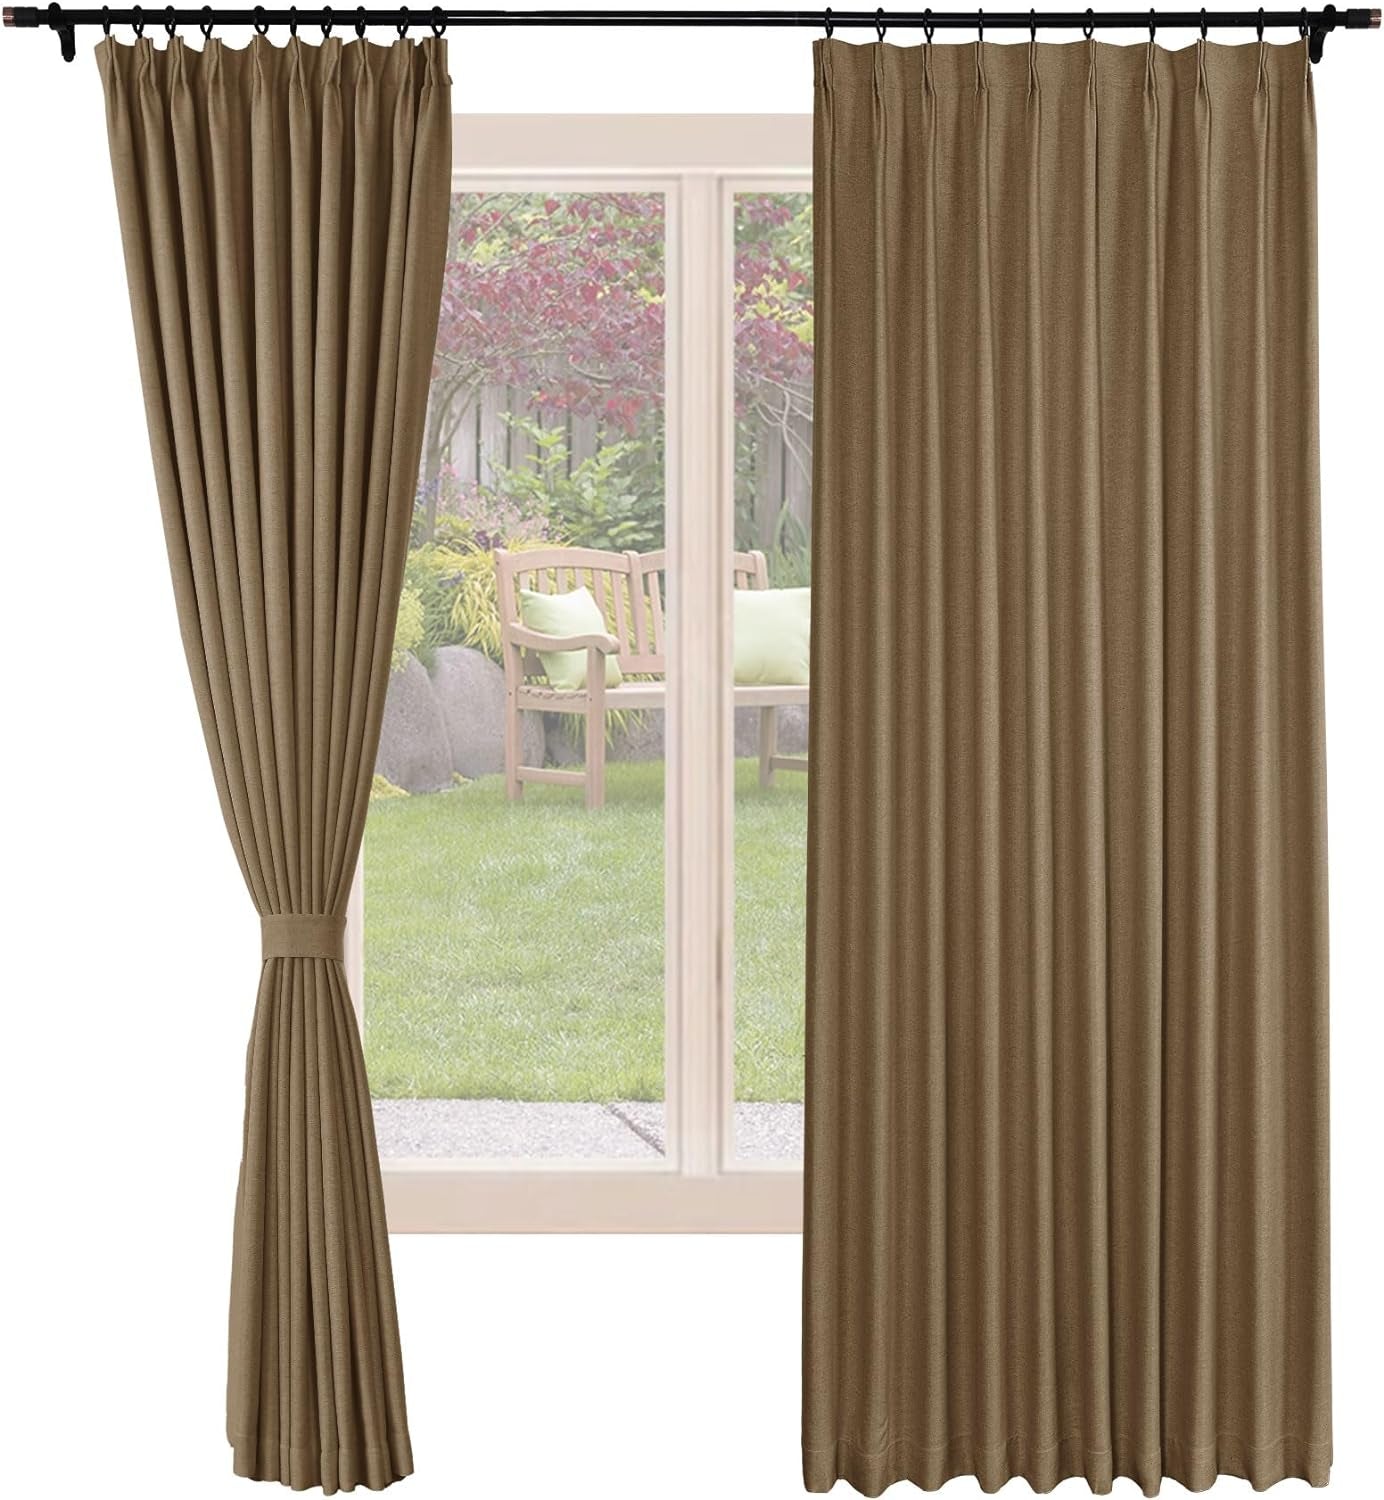 Frelement Blackout Curtains Natural Linen Curtains Pinch Pleat Drapery Panels for Living Room Thermal Insulated Curtains, 52" W X 63" L, 2 Panels, Oasis  Frelement 12 Coca Mocha (84Wx96L Inch)*2 